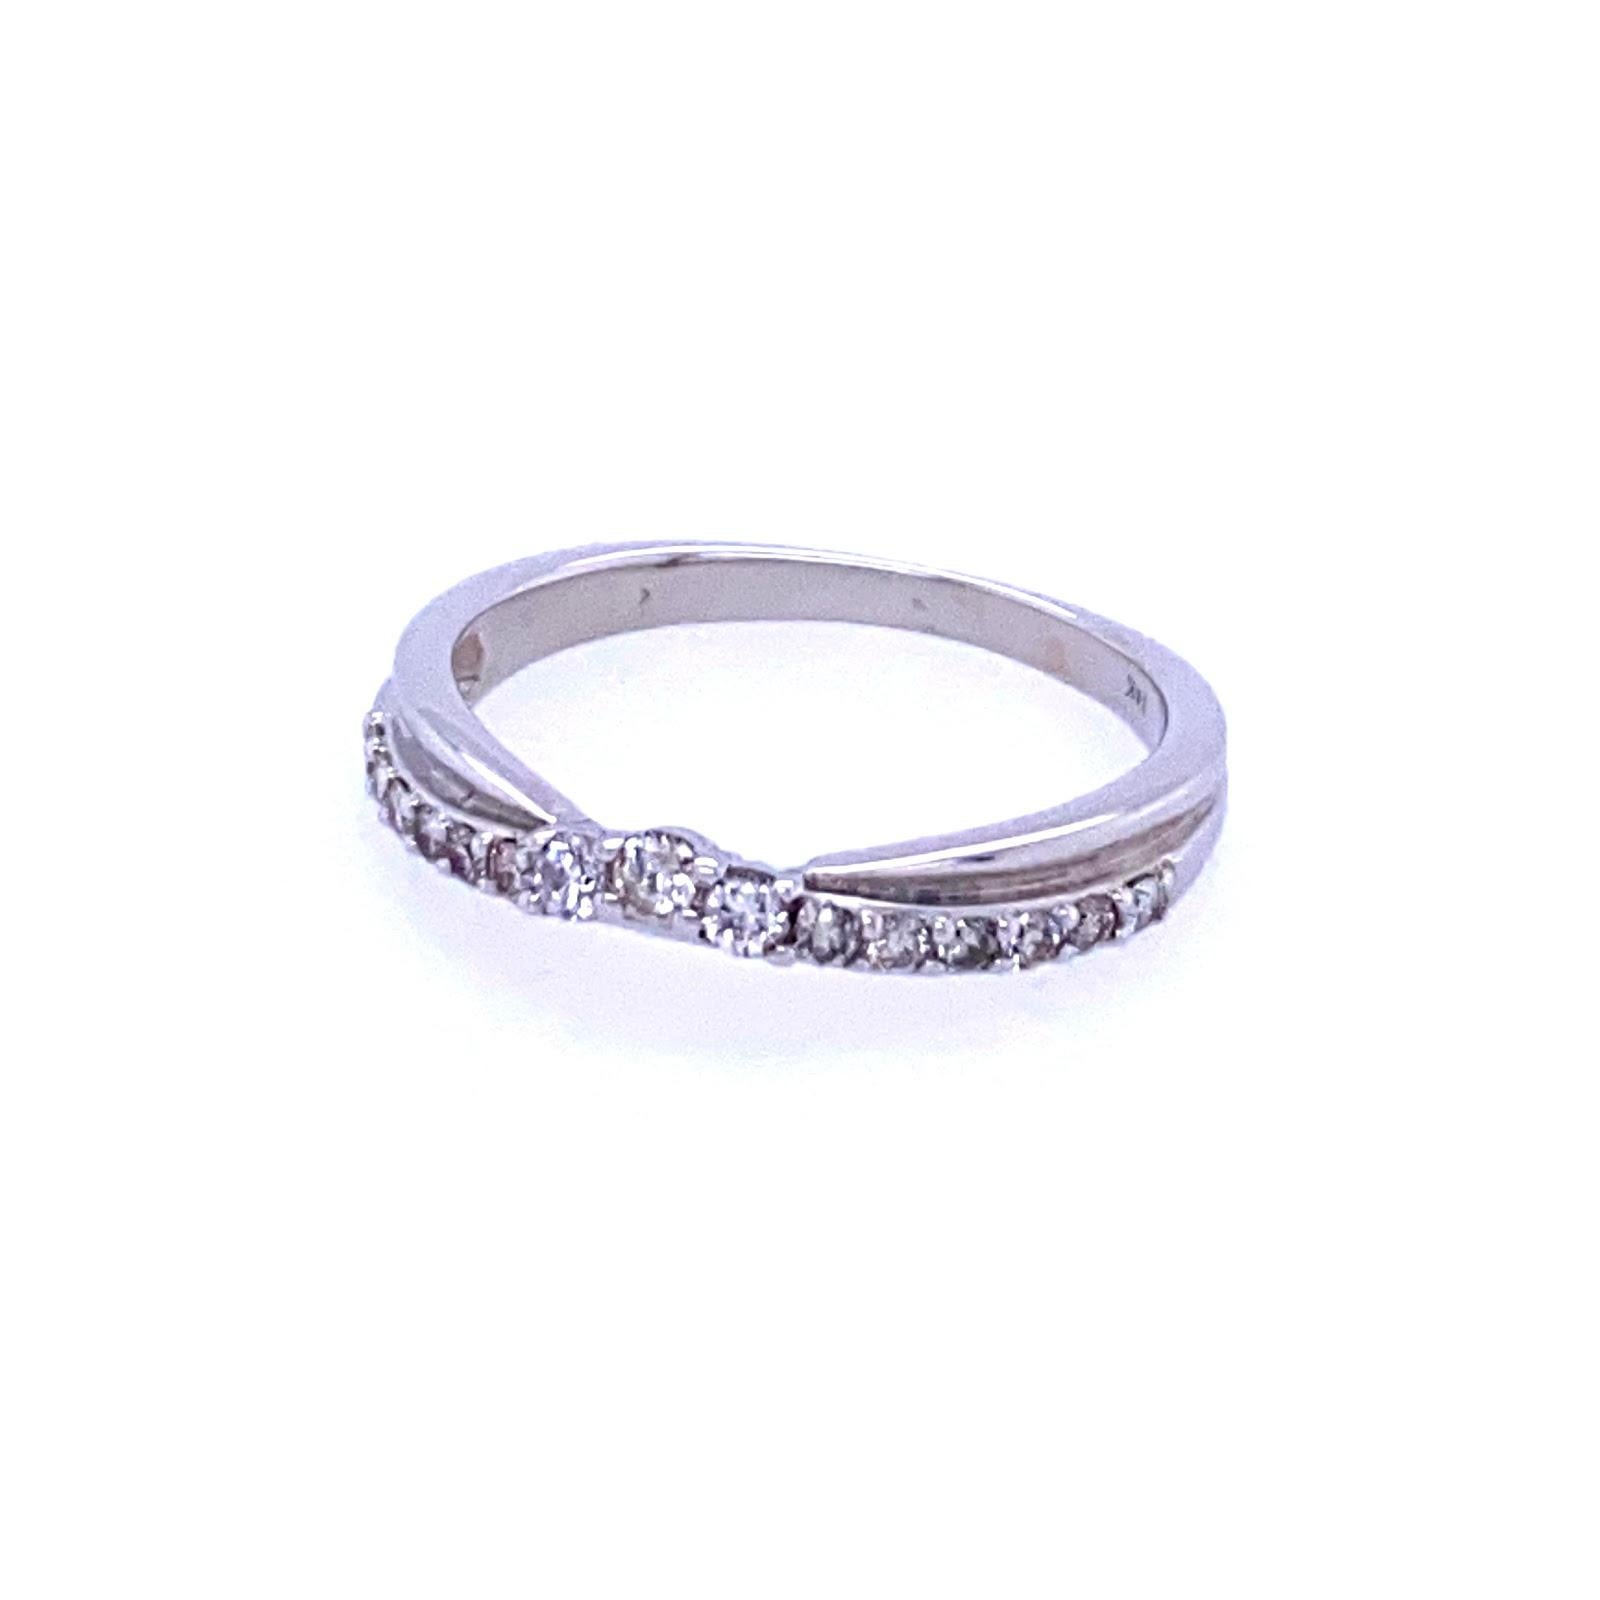 14 karat white gold (stamped 14K) band with 15 round brilliant diamonds in the I/J color range,  SI clarity, and 0.20 carat total weight. The ring features a twisted double row, and measures 3.2 mm at the top then tapers to 1.75 mm at the base. The